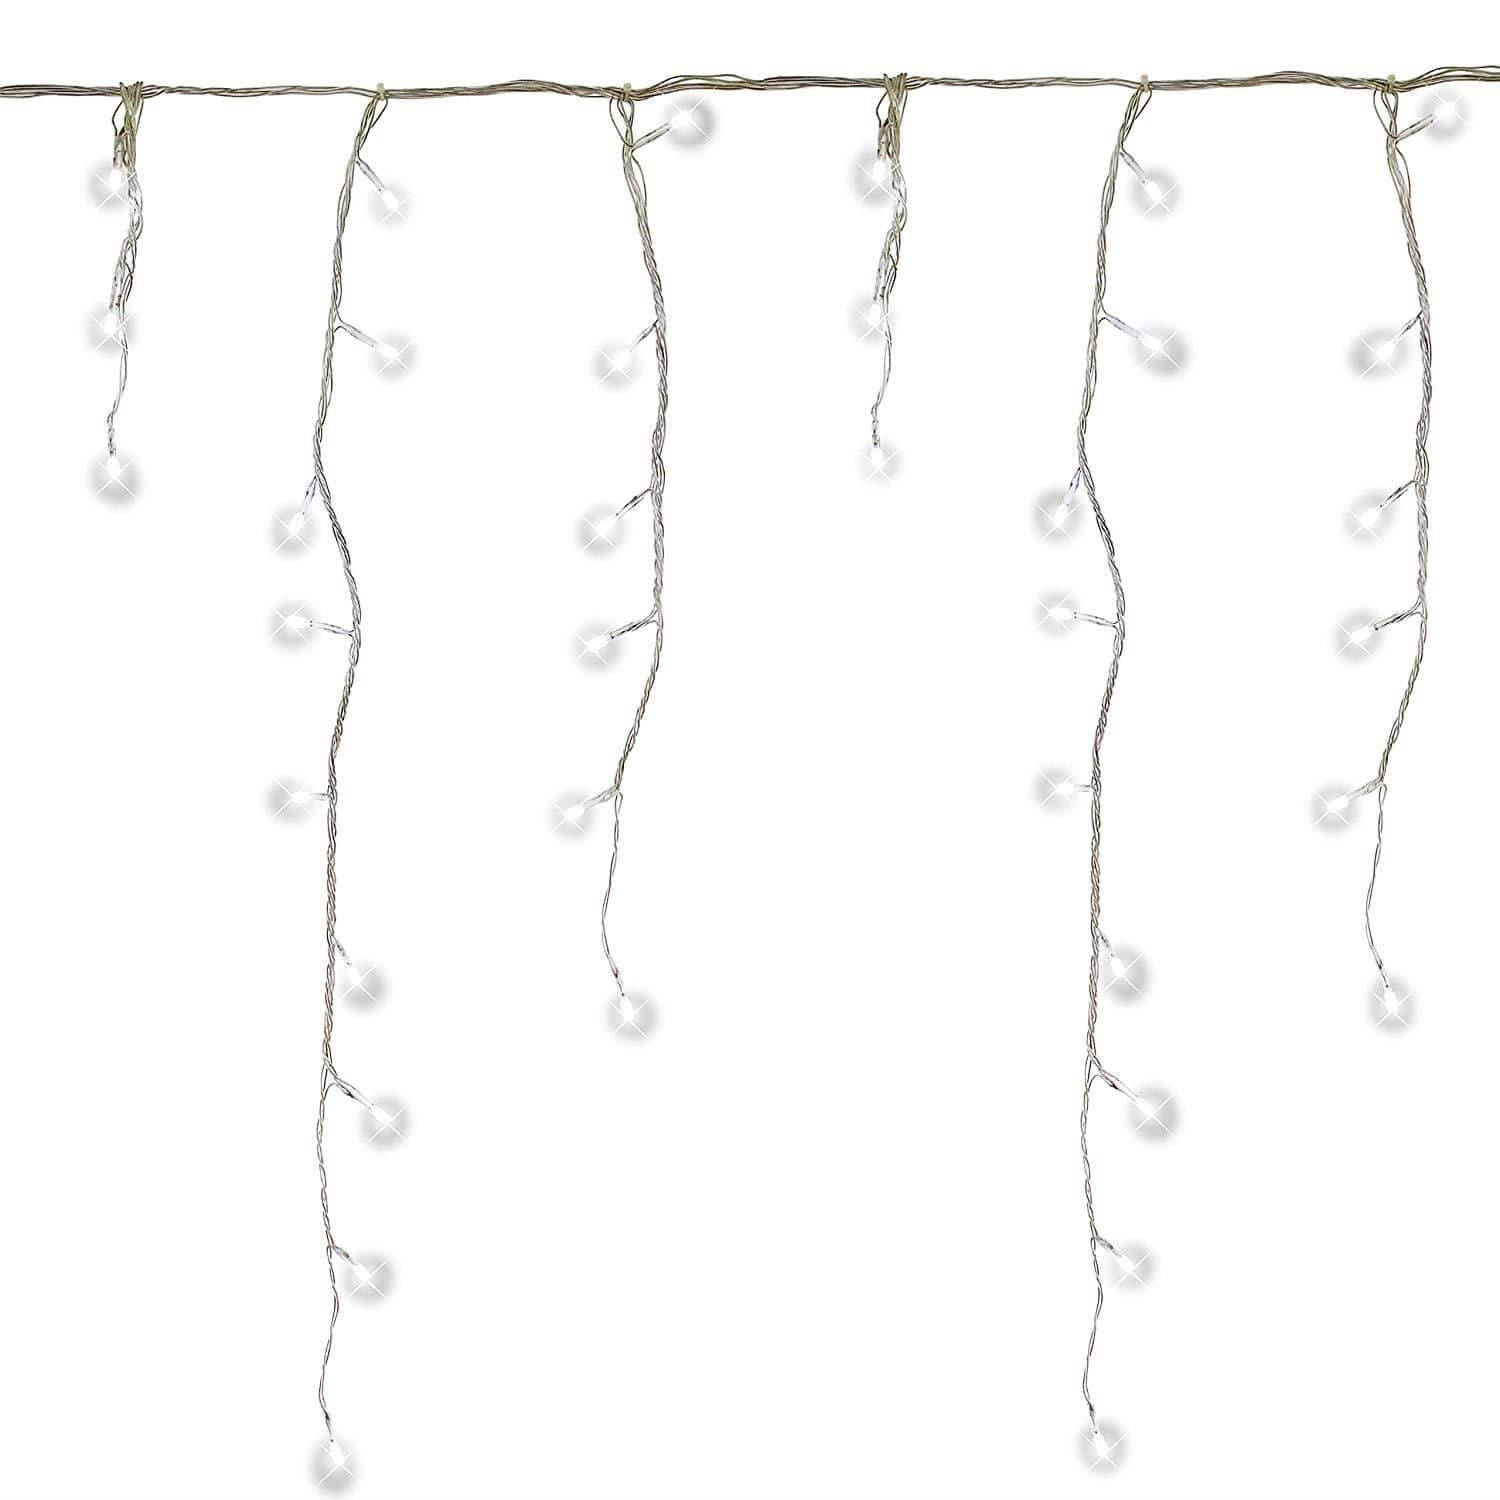 LED Indoor & Outdoor Snowing Icicle Lights with White Cable (360 Lights) - White Lights 8800228216823 only5pounds-com